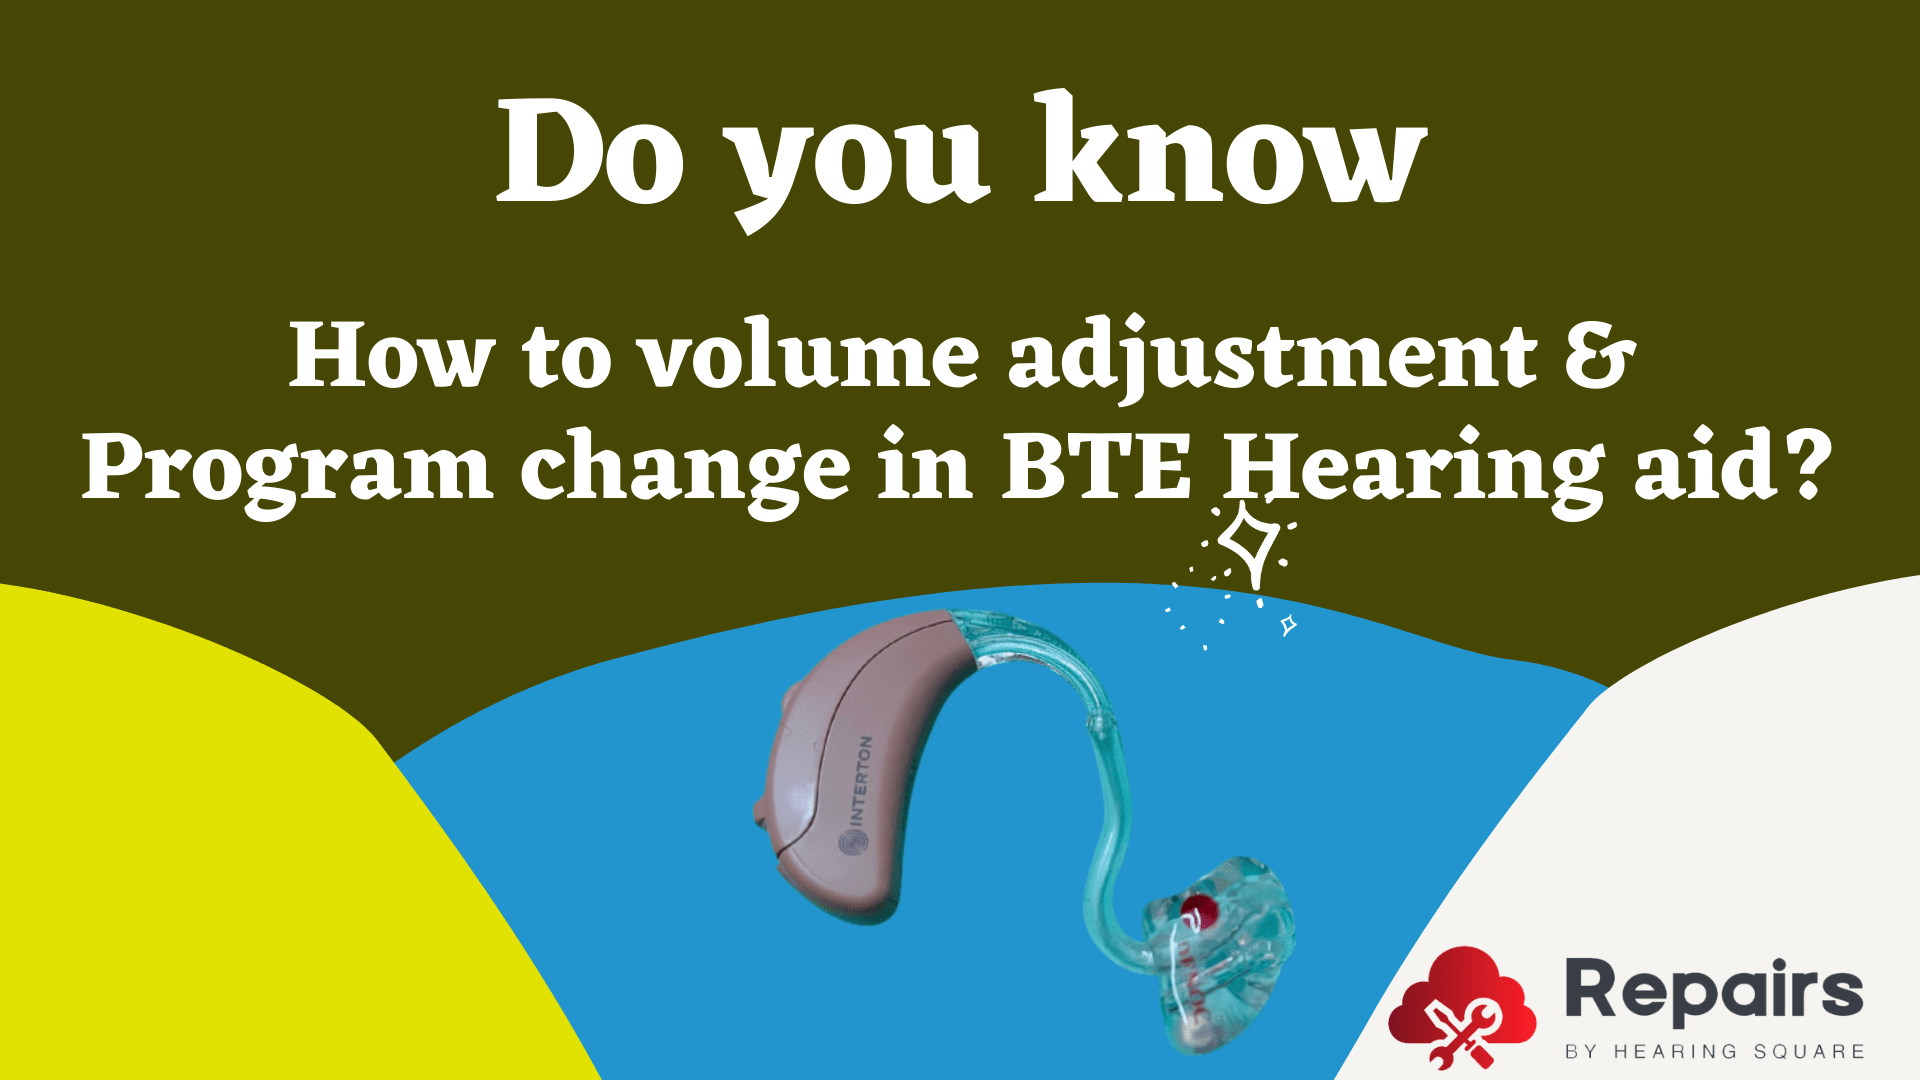 How to volume adjustment & Program change in BTE Hearing aid